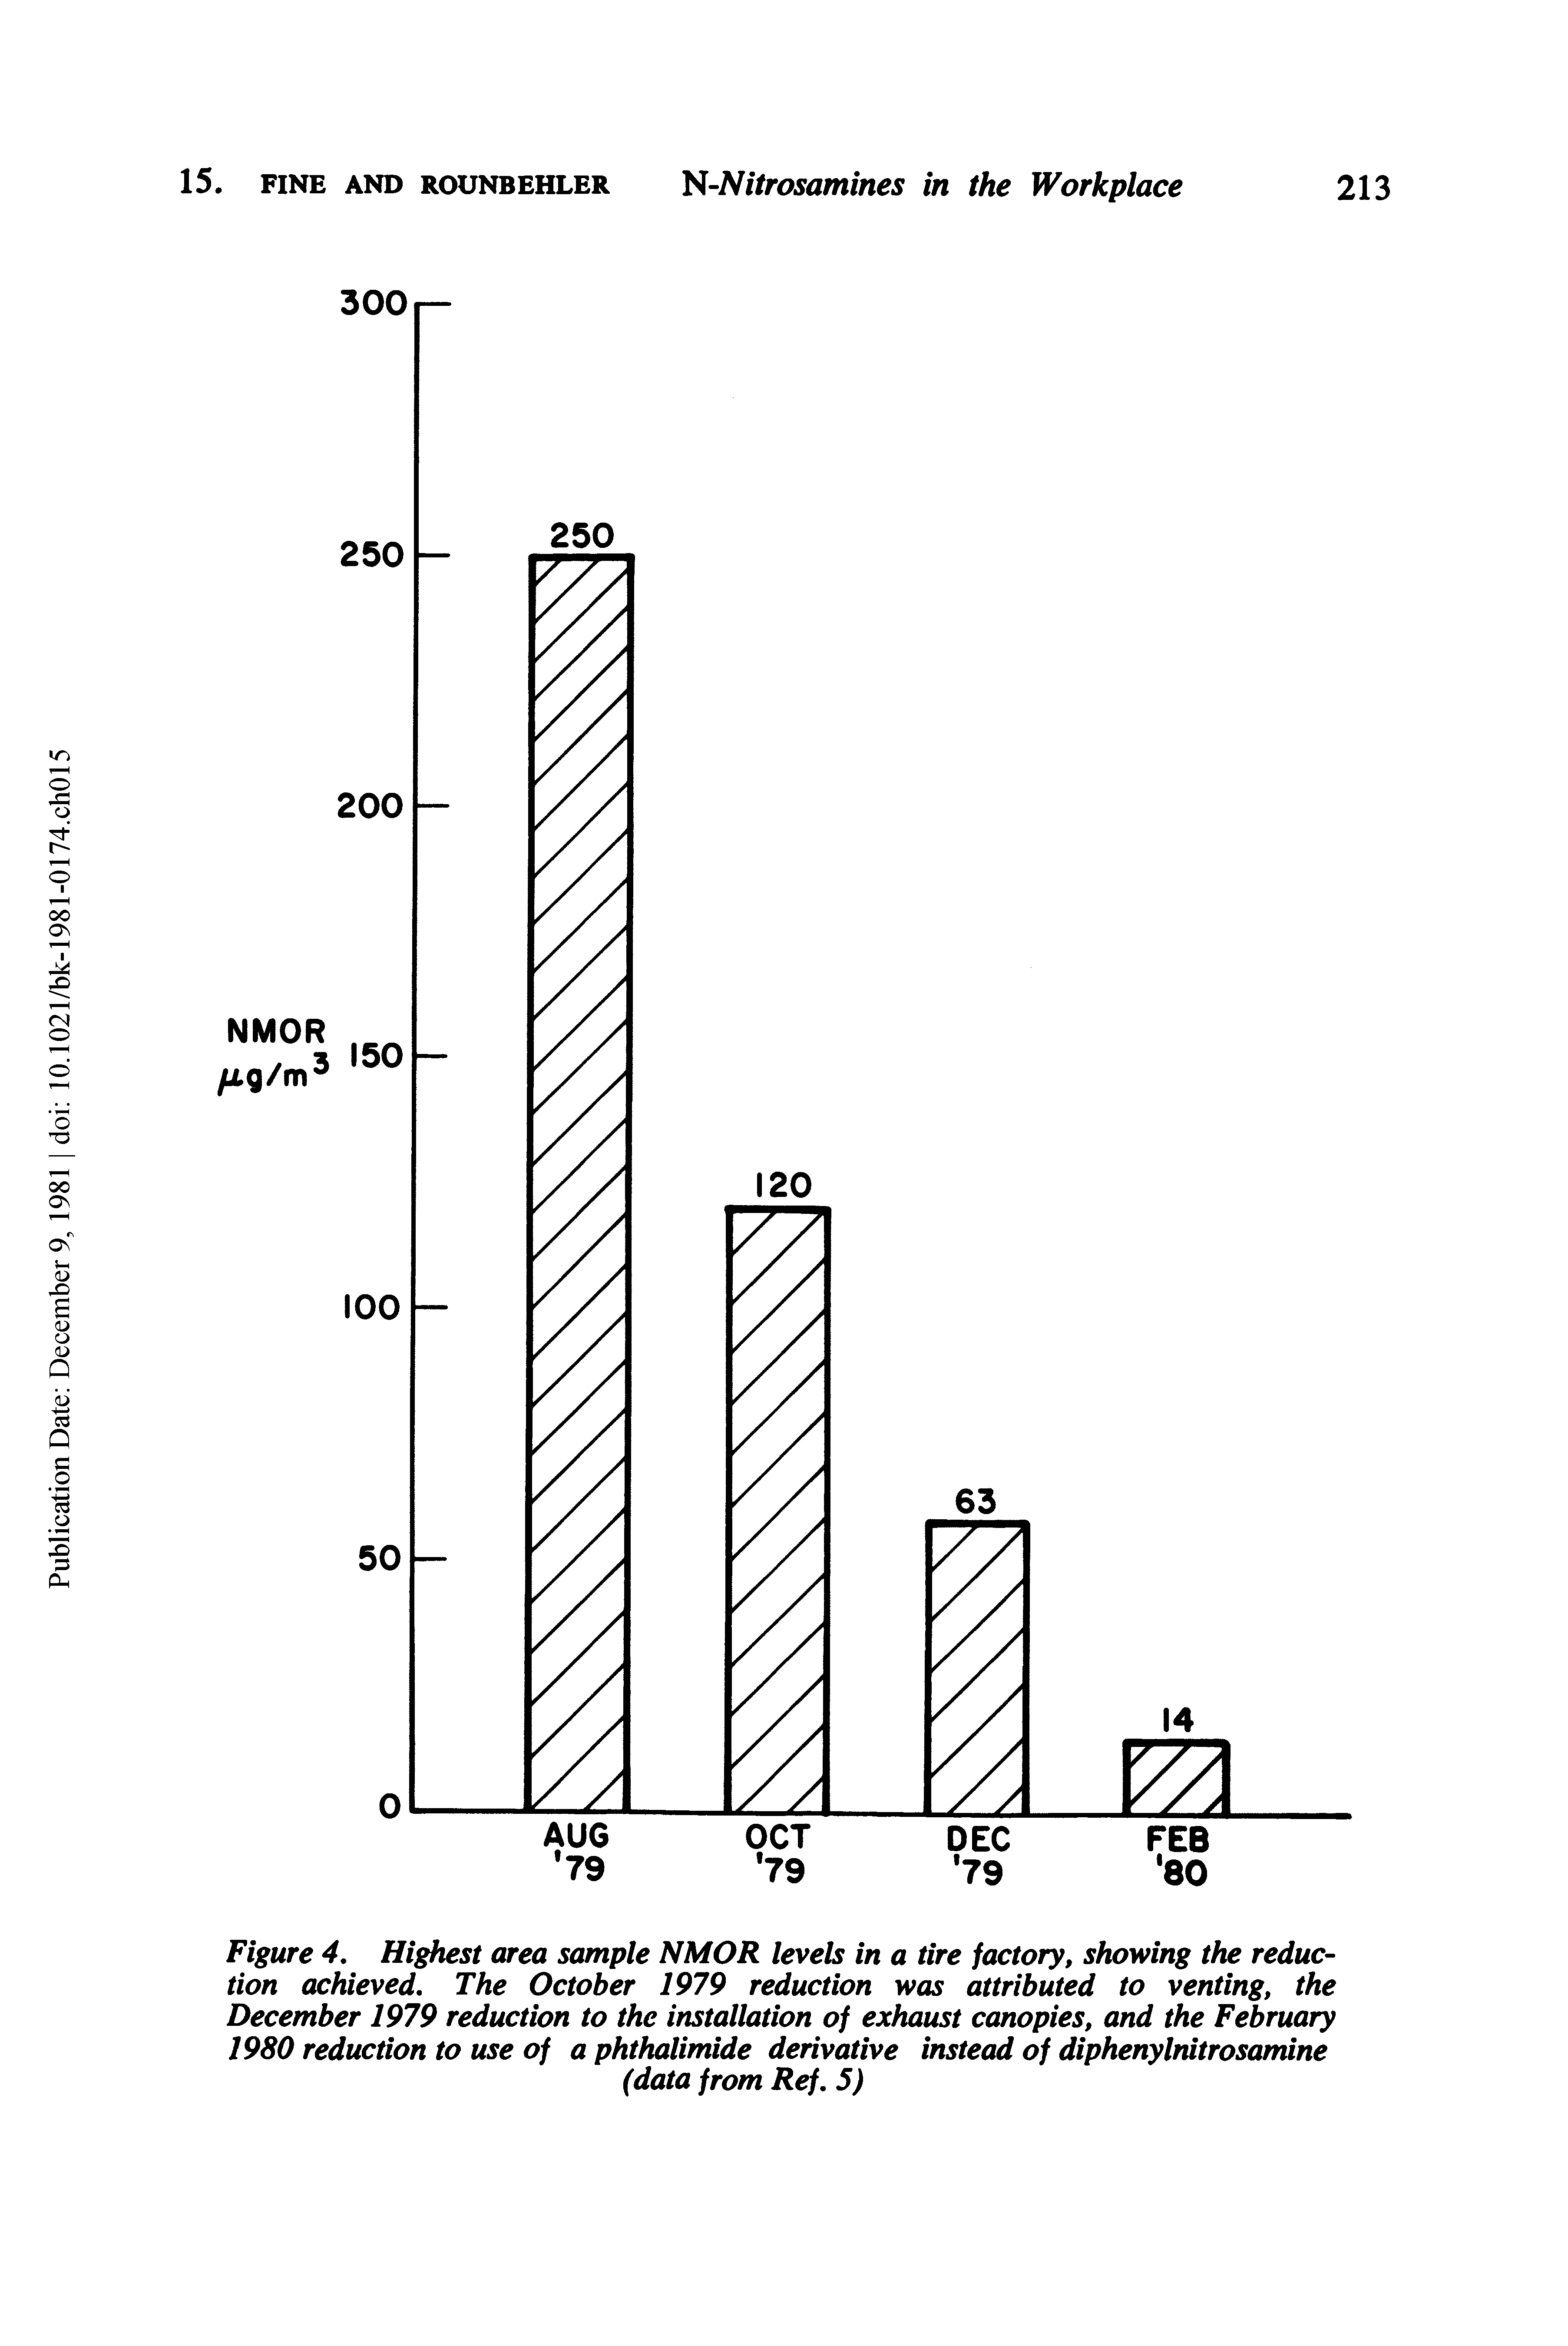 Figure 4, Highest area sample NMOR levels in a tire factory, showing the reduction achieved. The October 1979 reduction was attributed to venting, the December 1979 reduction to the installation of exhaust canopies, and the February 1980 reduction to use of a phthalimide derivative instead of diphenylnitrosamine...